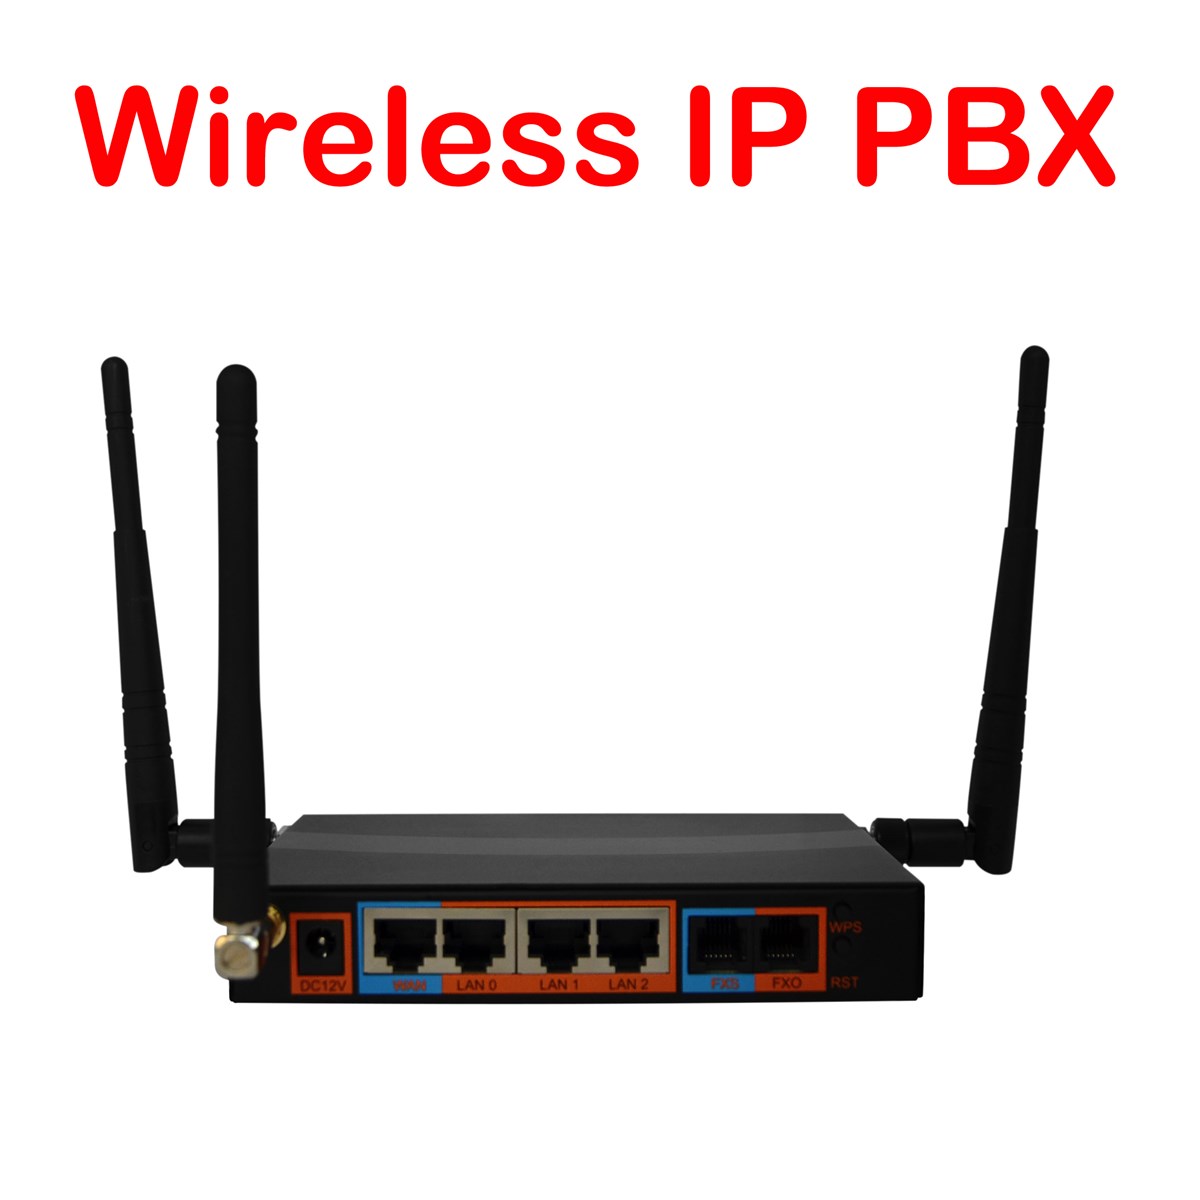 4G Modern Wireless VoIP PBX with Auto Attendant System IVR Support SIP Server